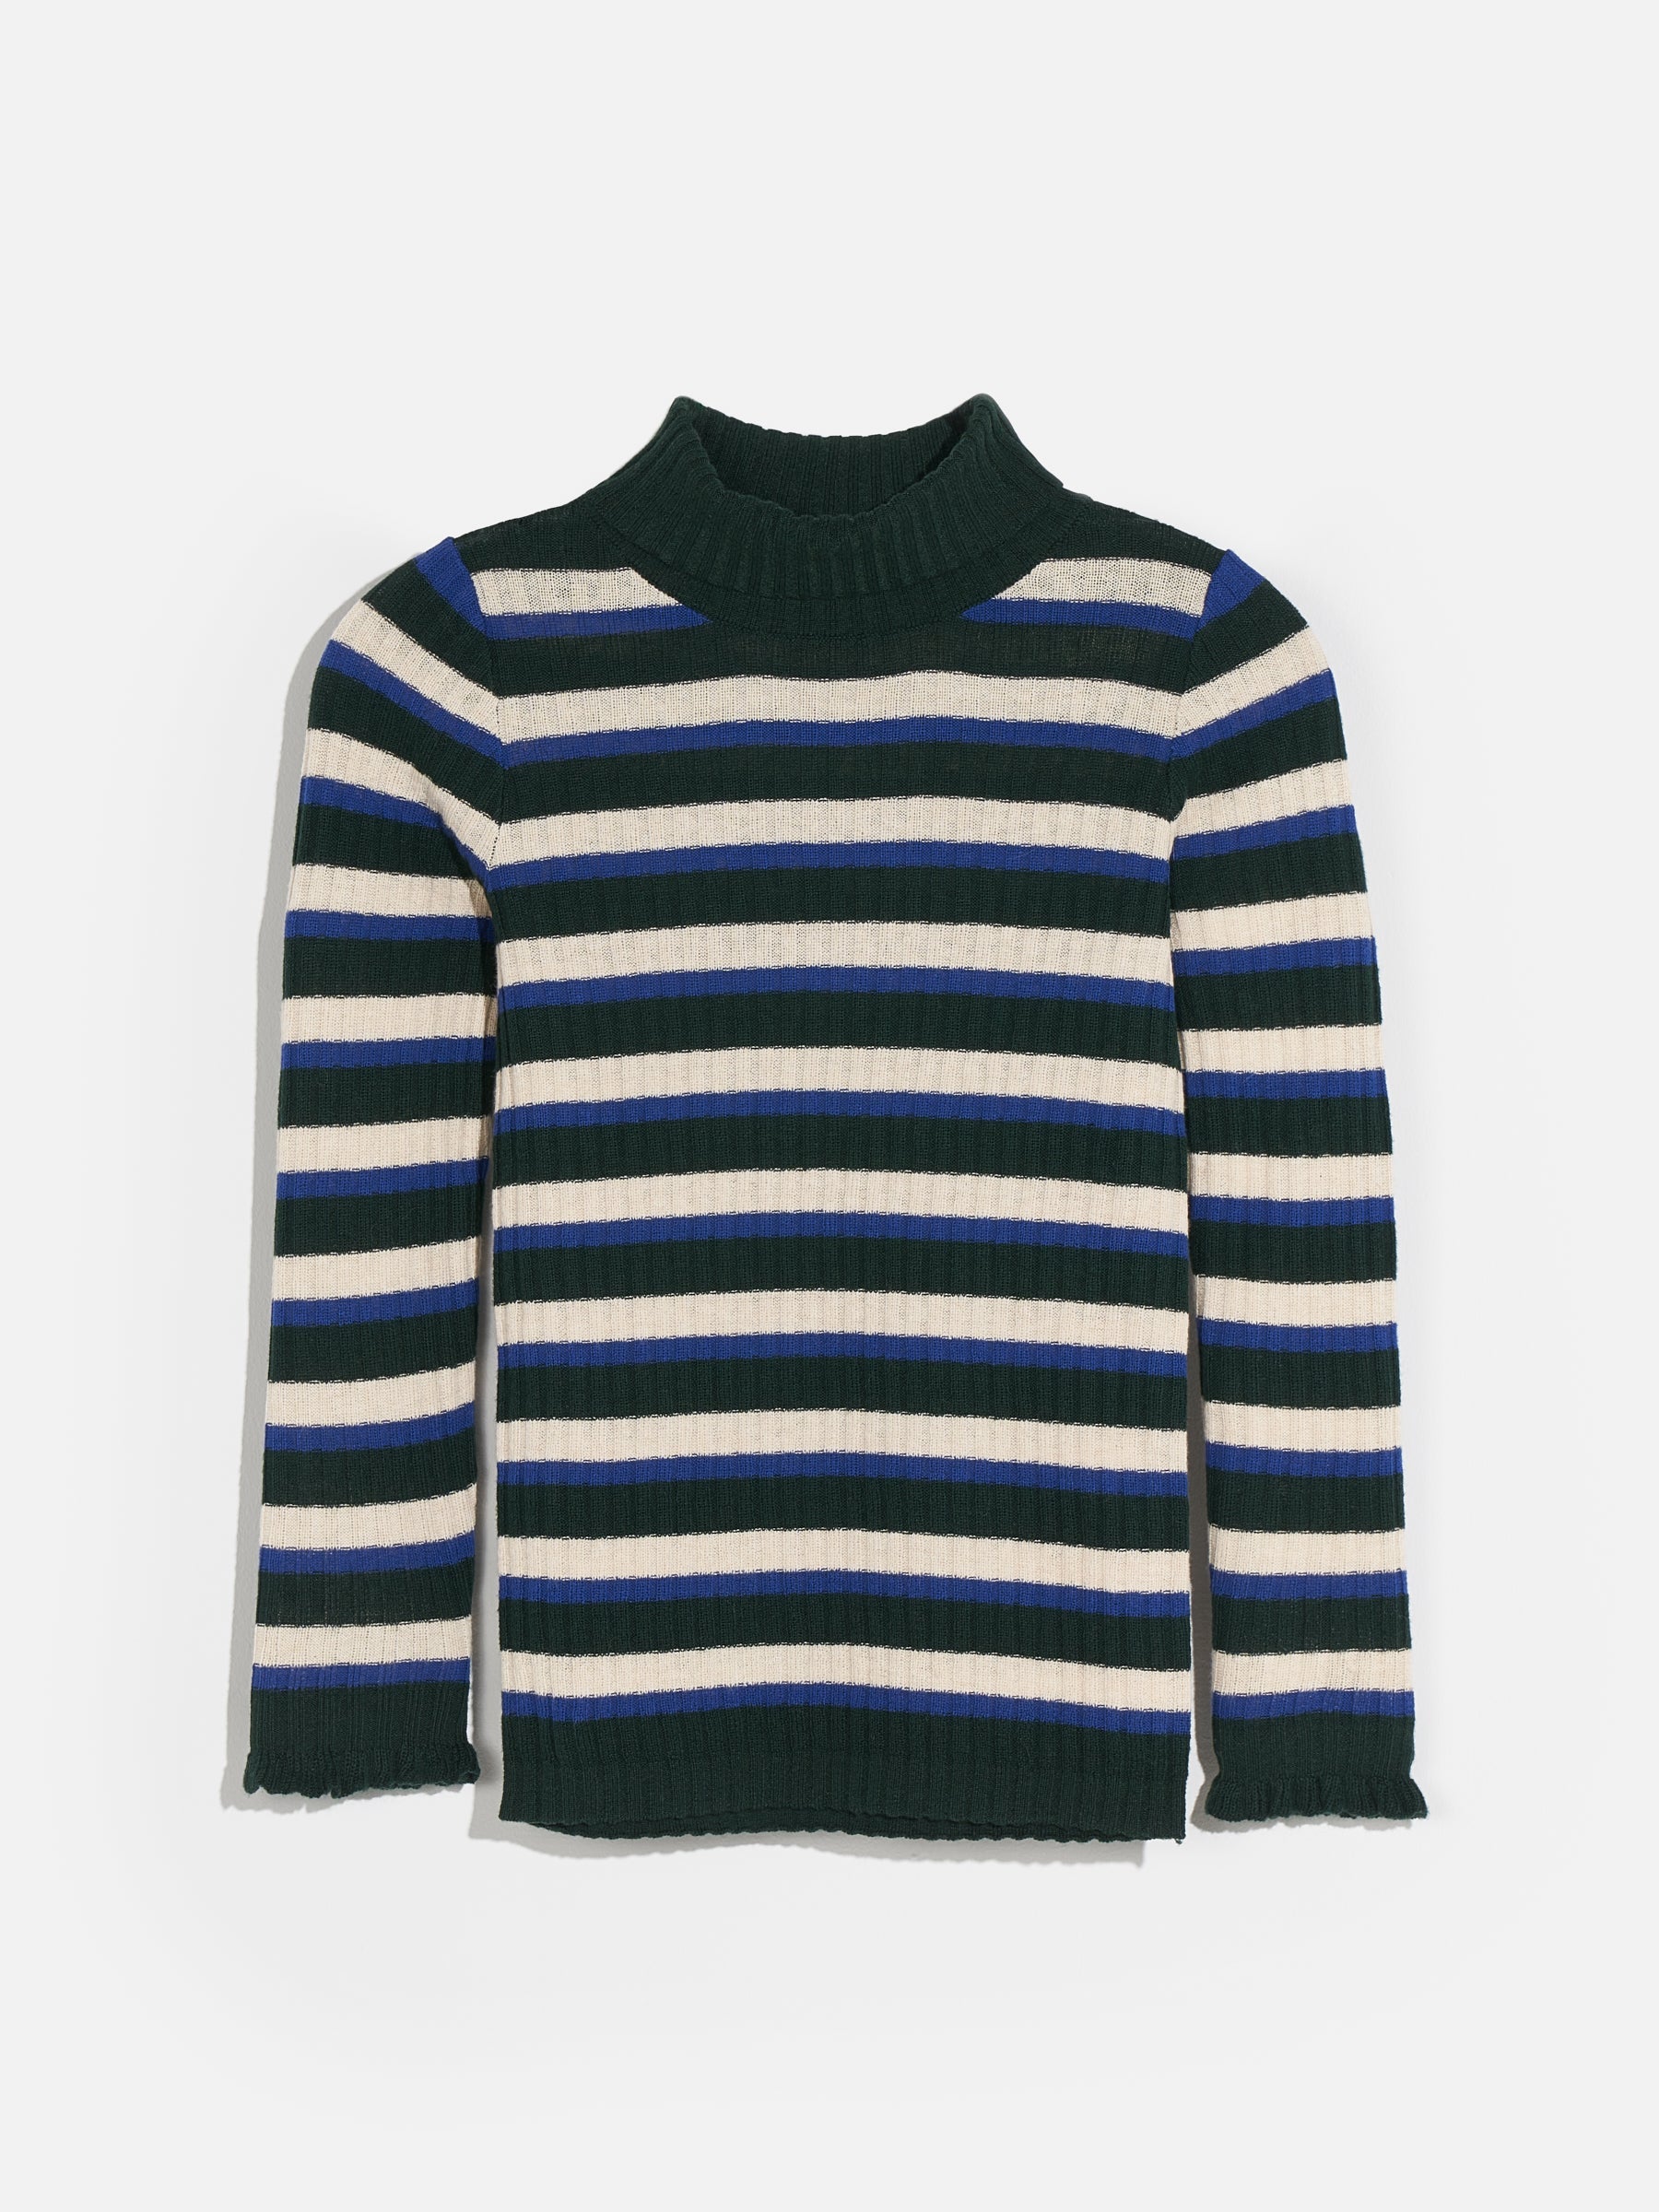 Bellerose - Gouly Knit Sweater